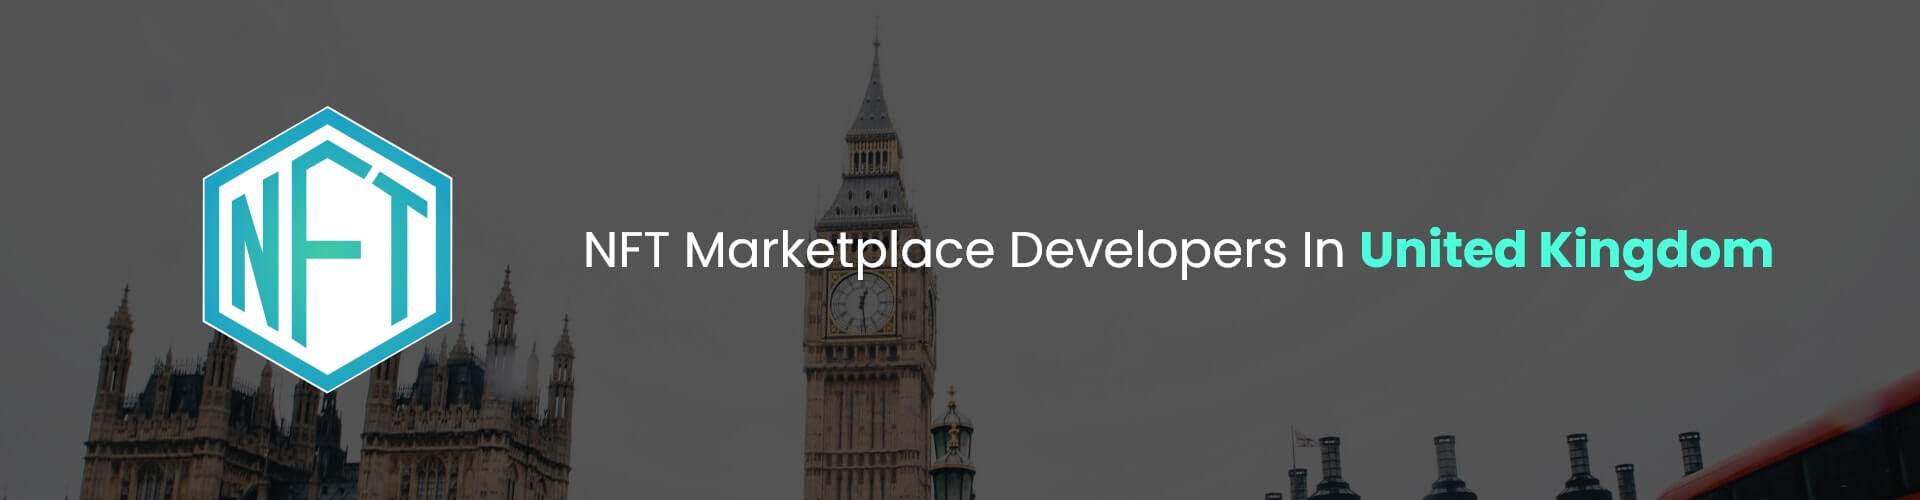 hire nft marketplace developers in united kingdom